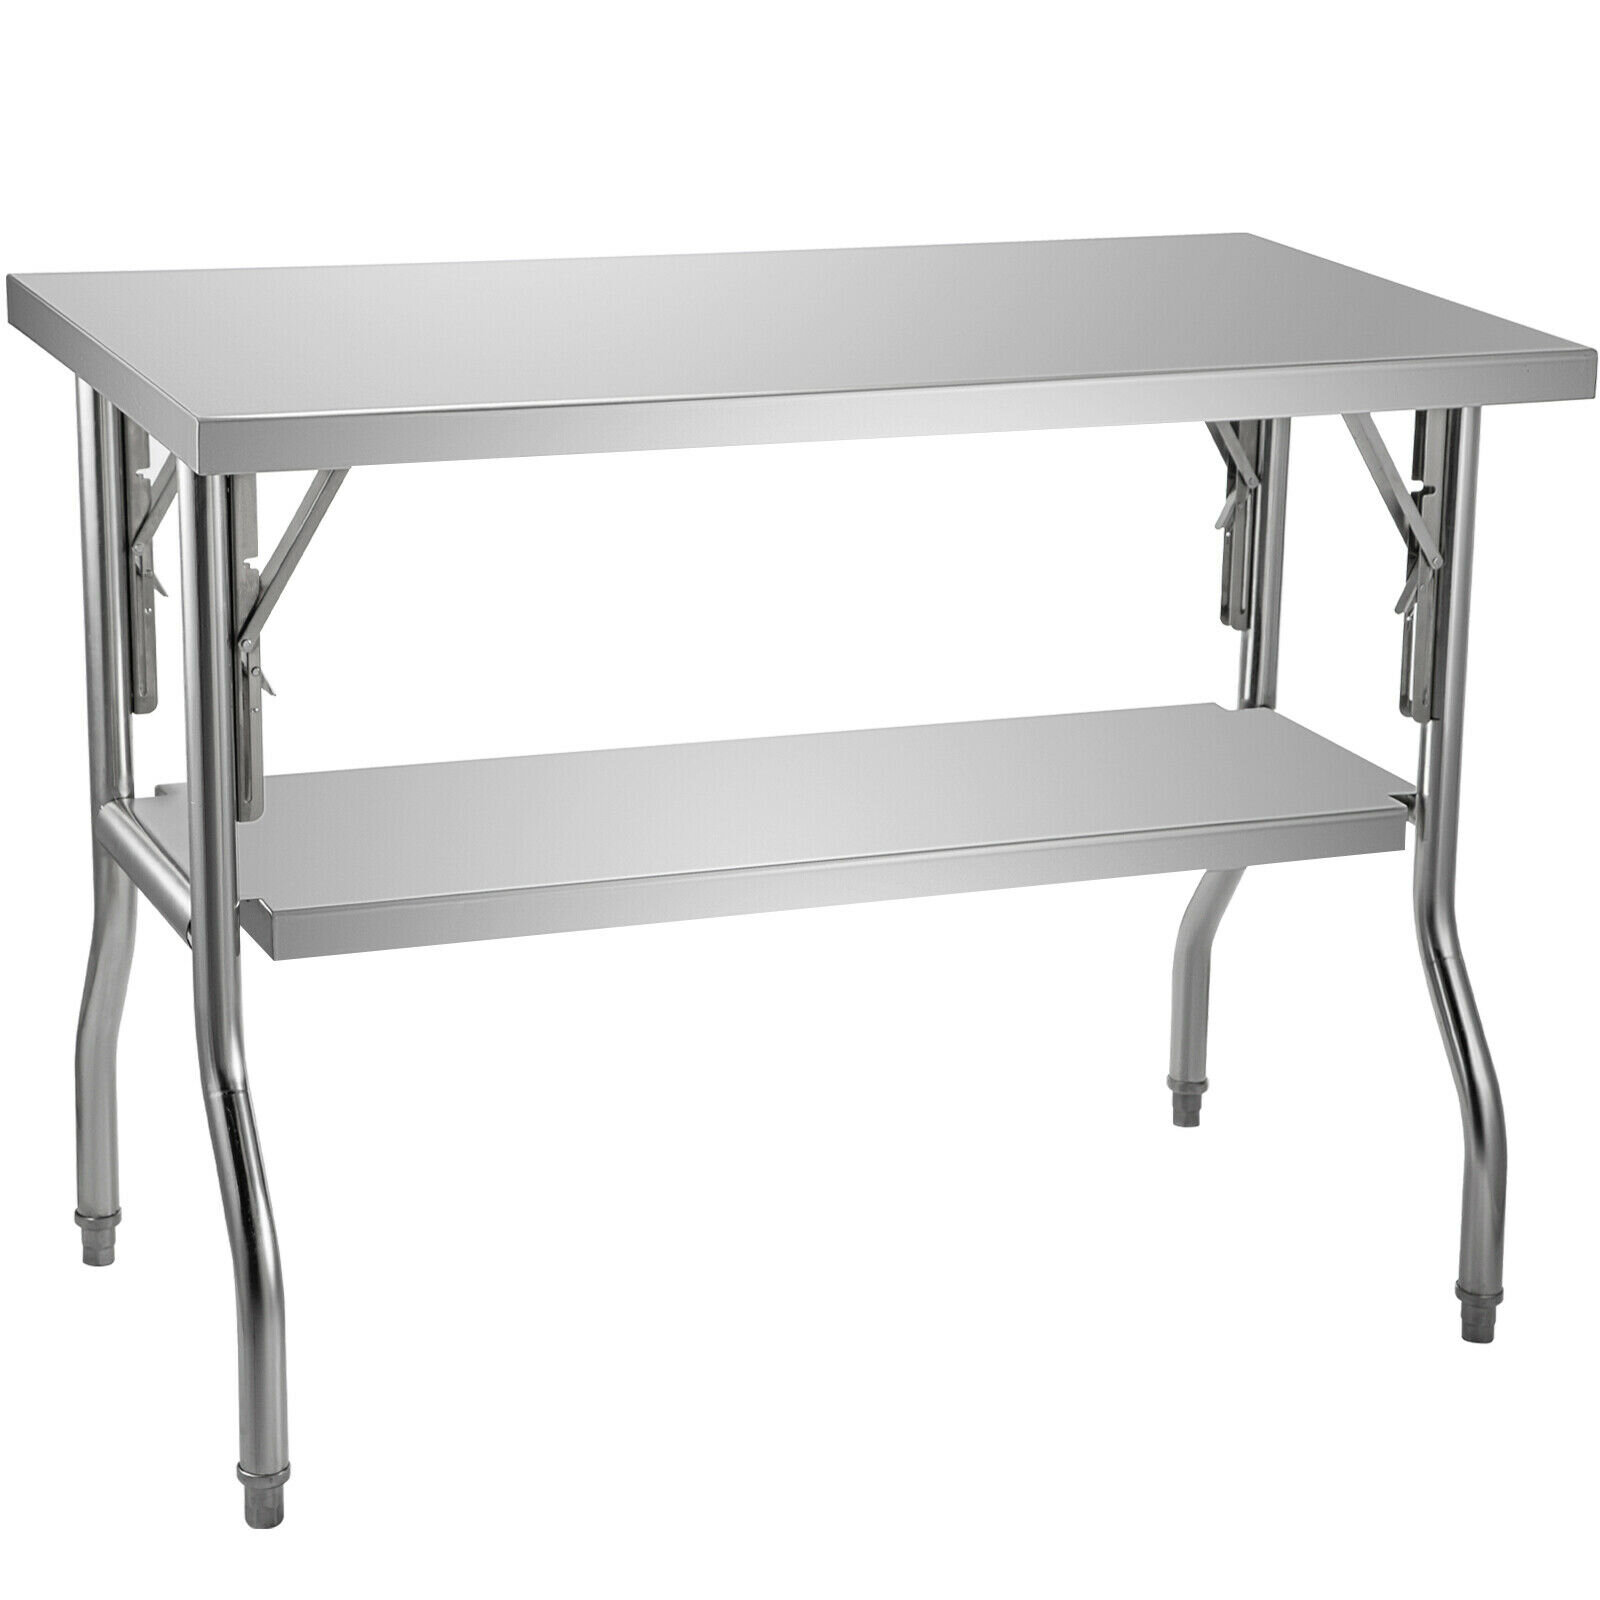 Details about   24 x 48 Stainless Steel Work Prep Table With Undershelf Kitchen Restaurant House 